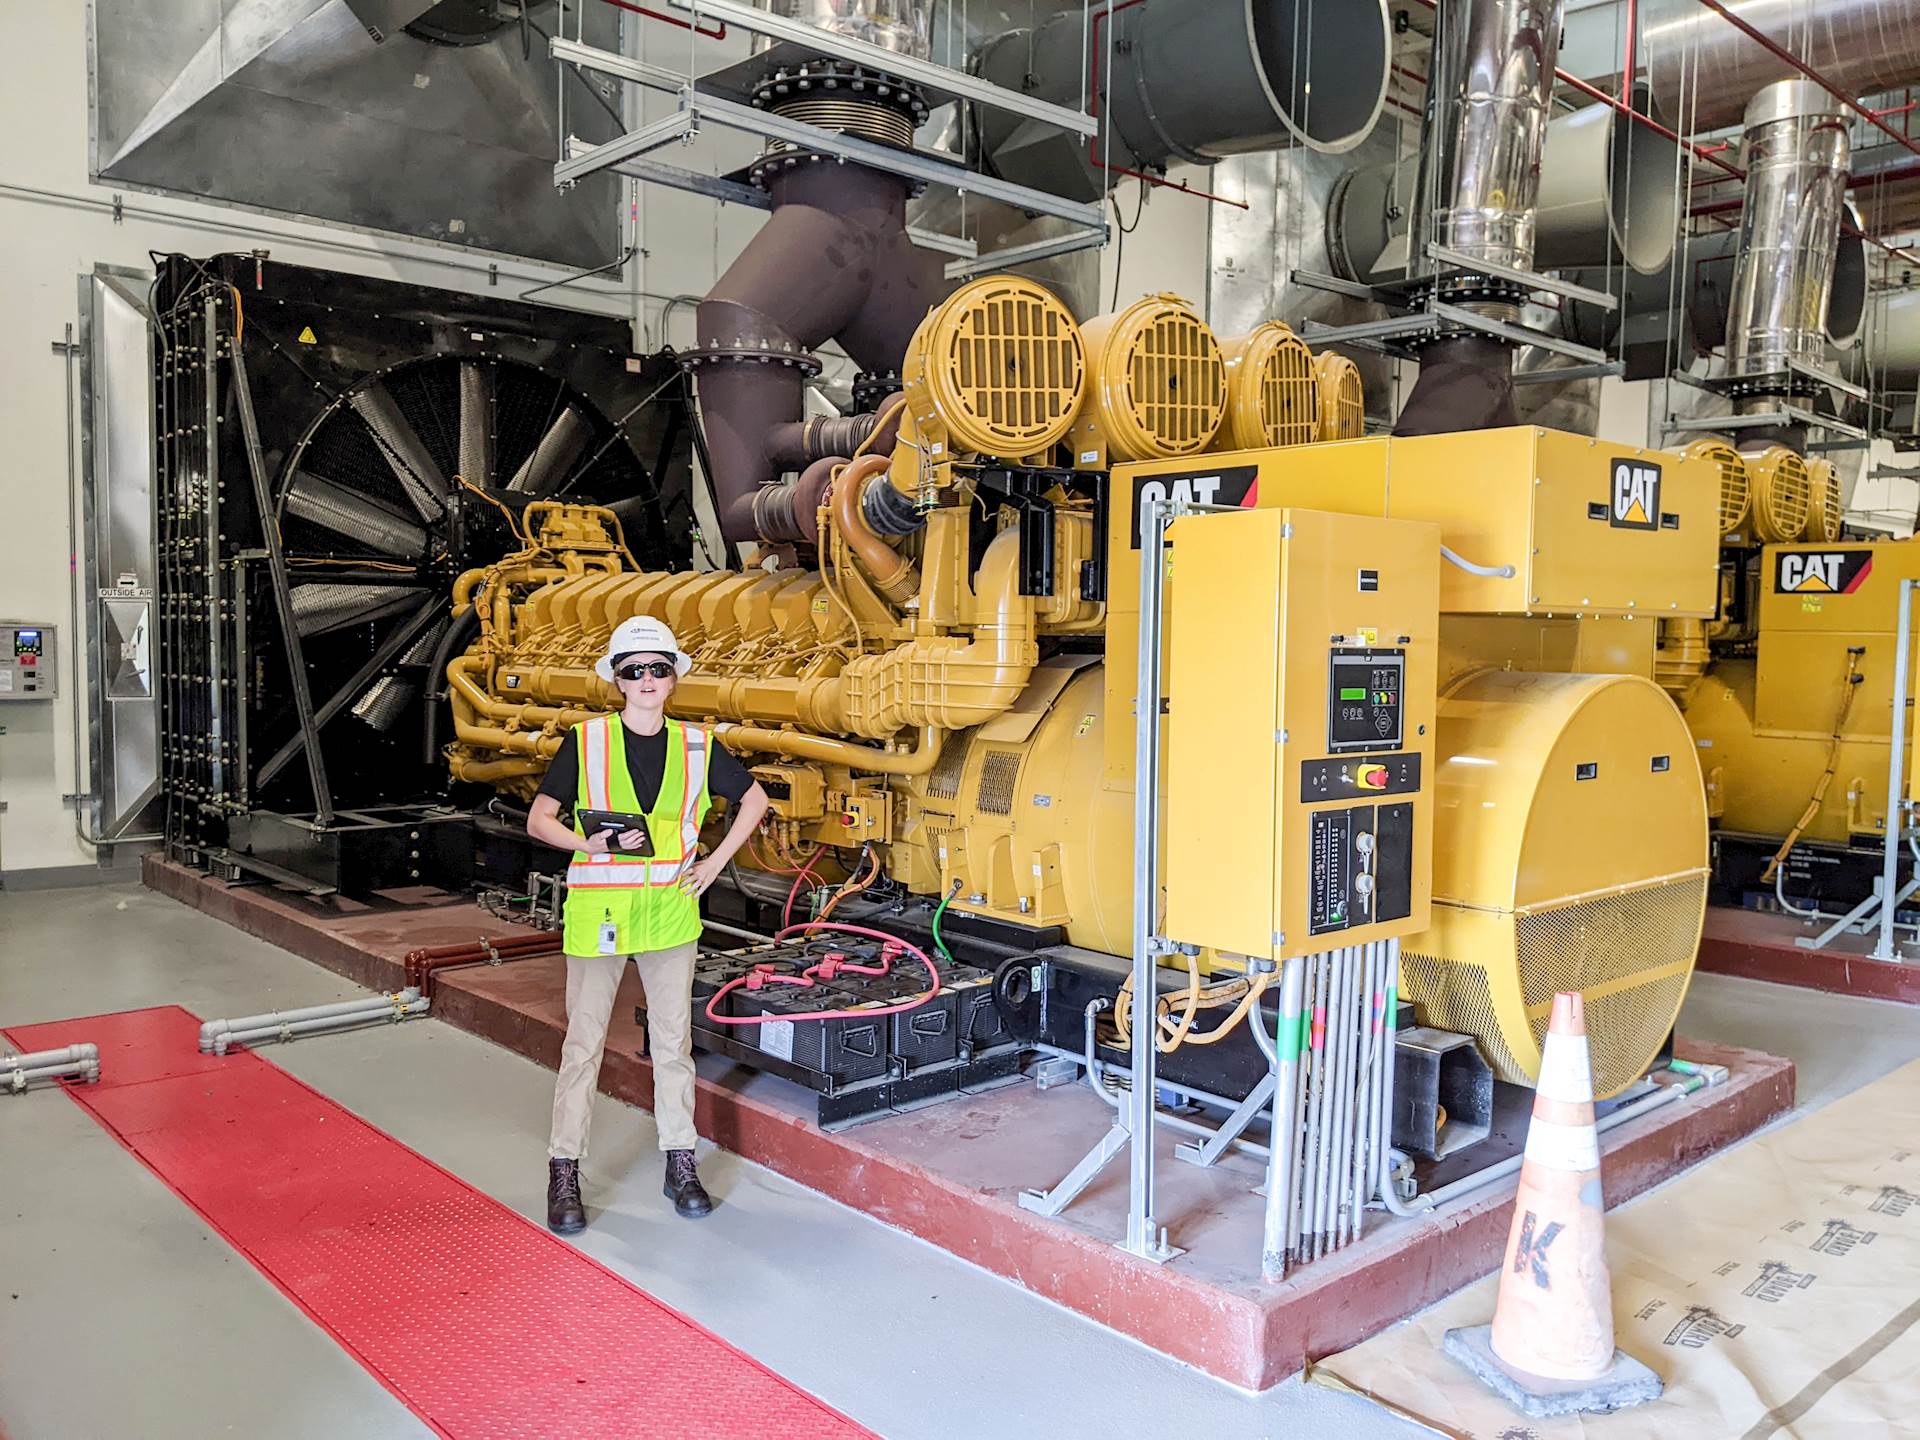 A large generator is behind an intern holding an electronic tablet.